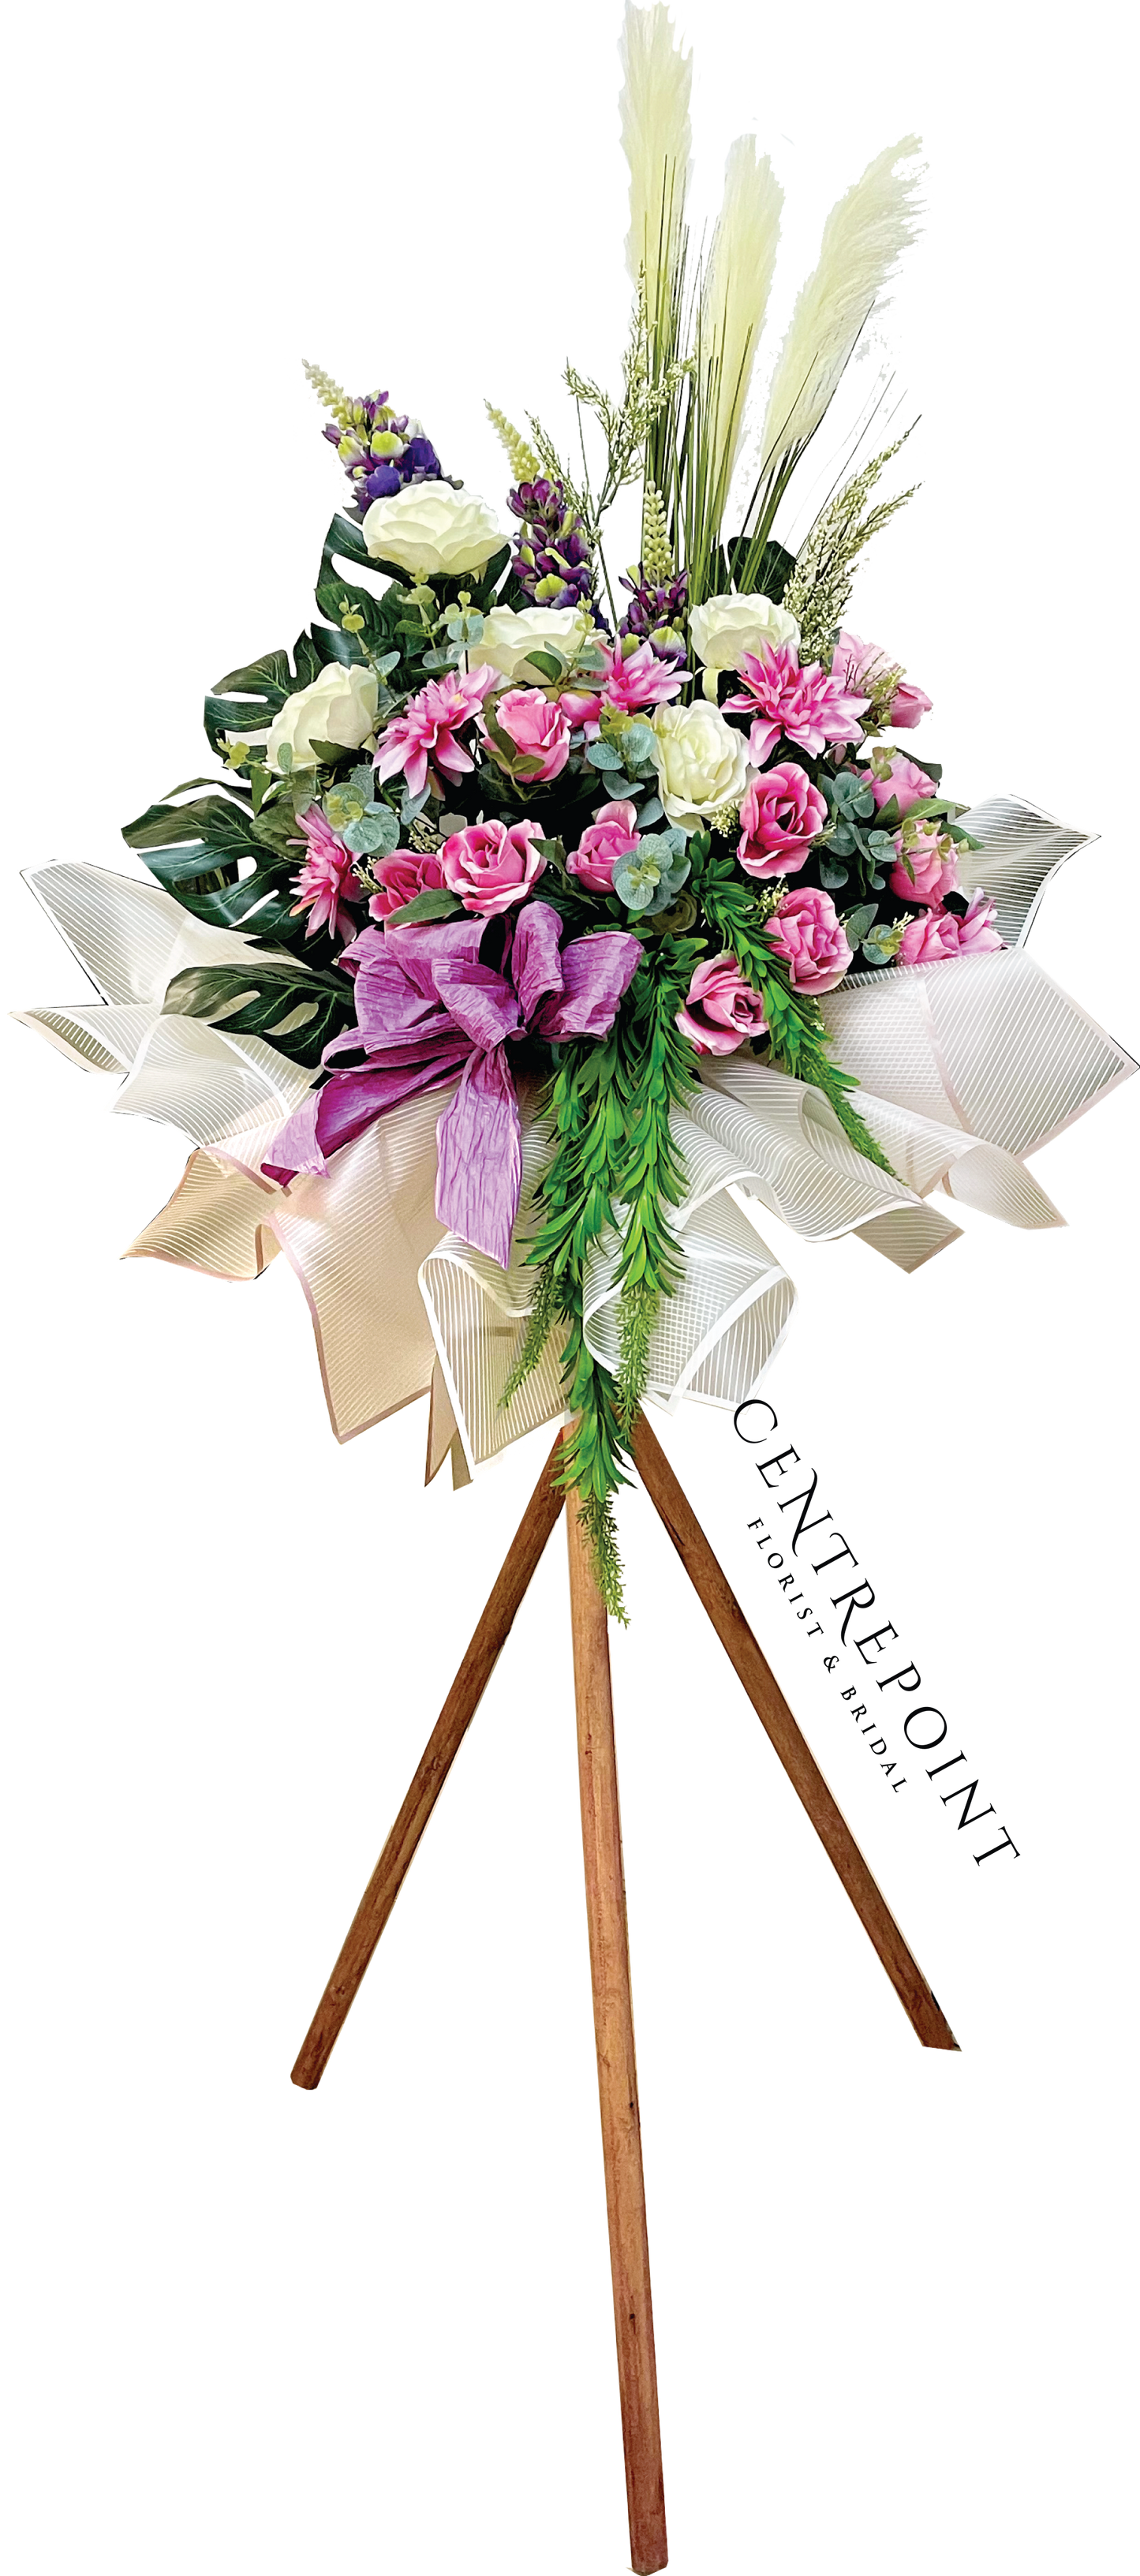 Opening Stand 063 - ARTIFICIAL FLOWER (RM 200.00)